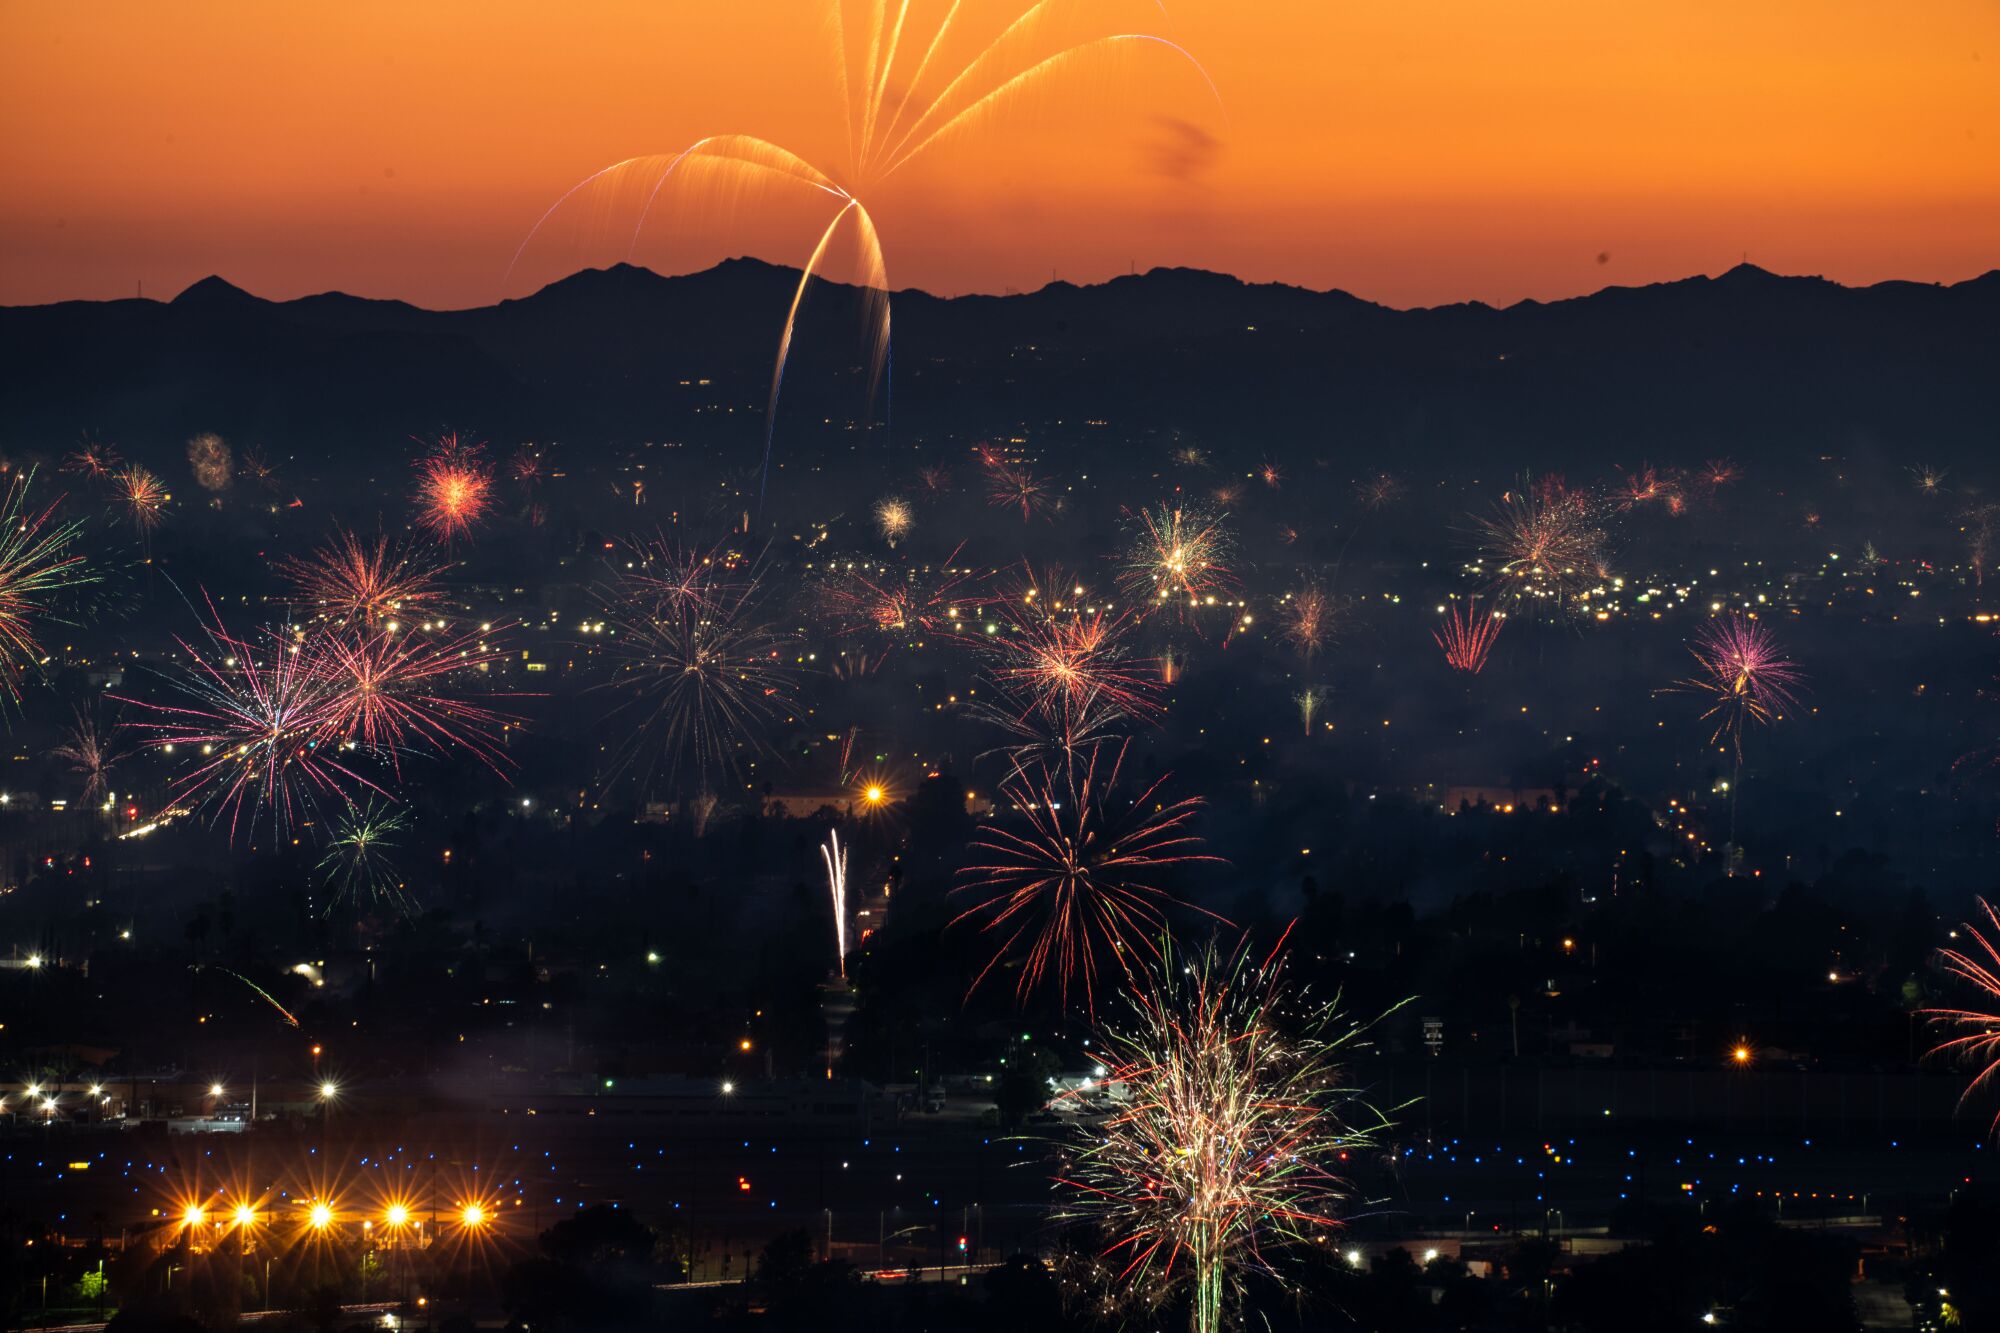  Fireworks over North Hollywood on Saturday, July 4.